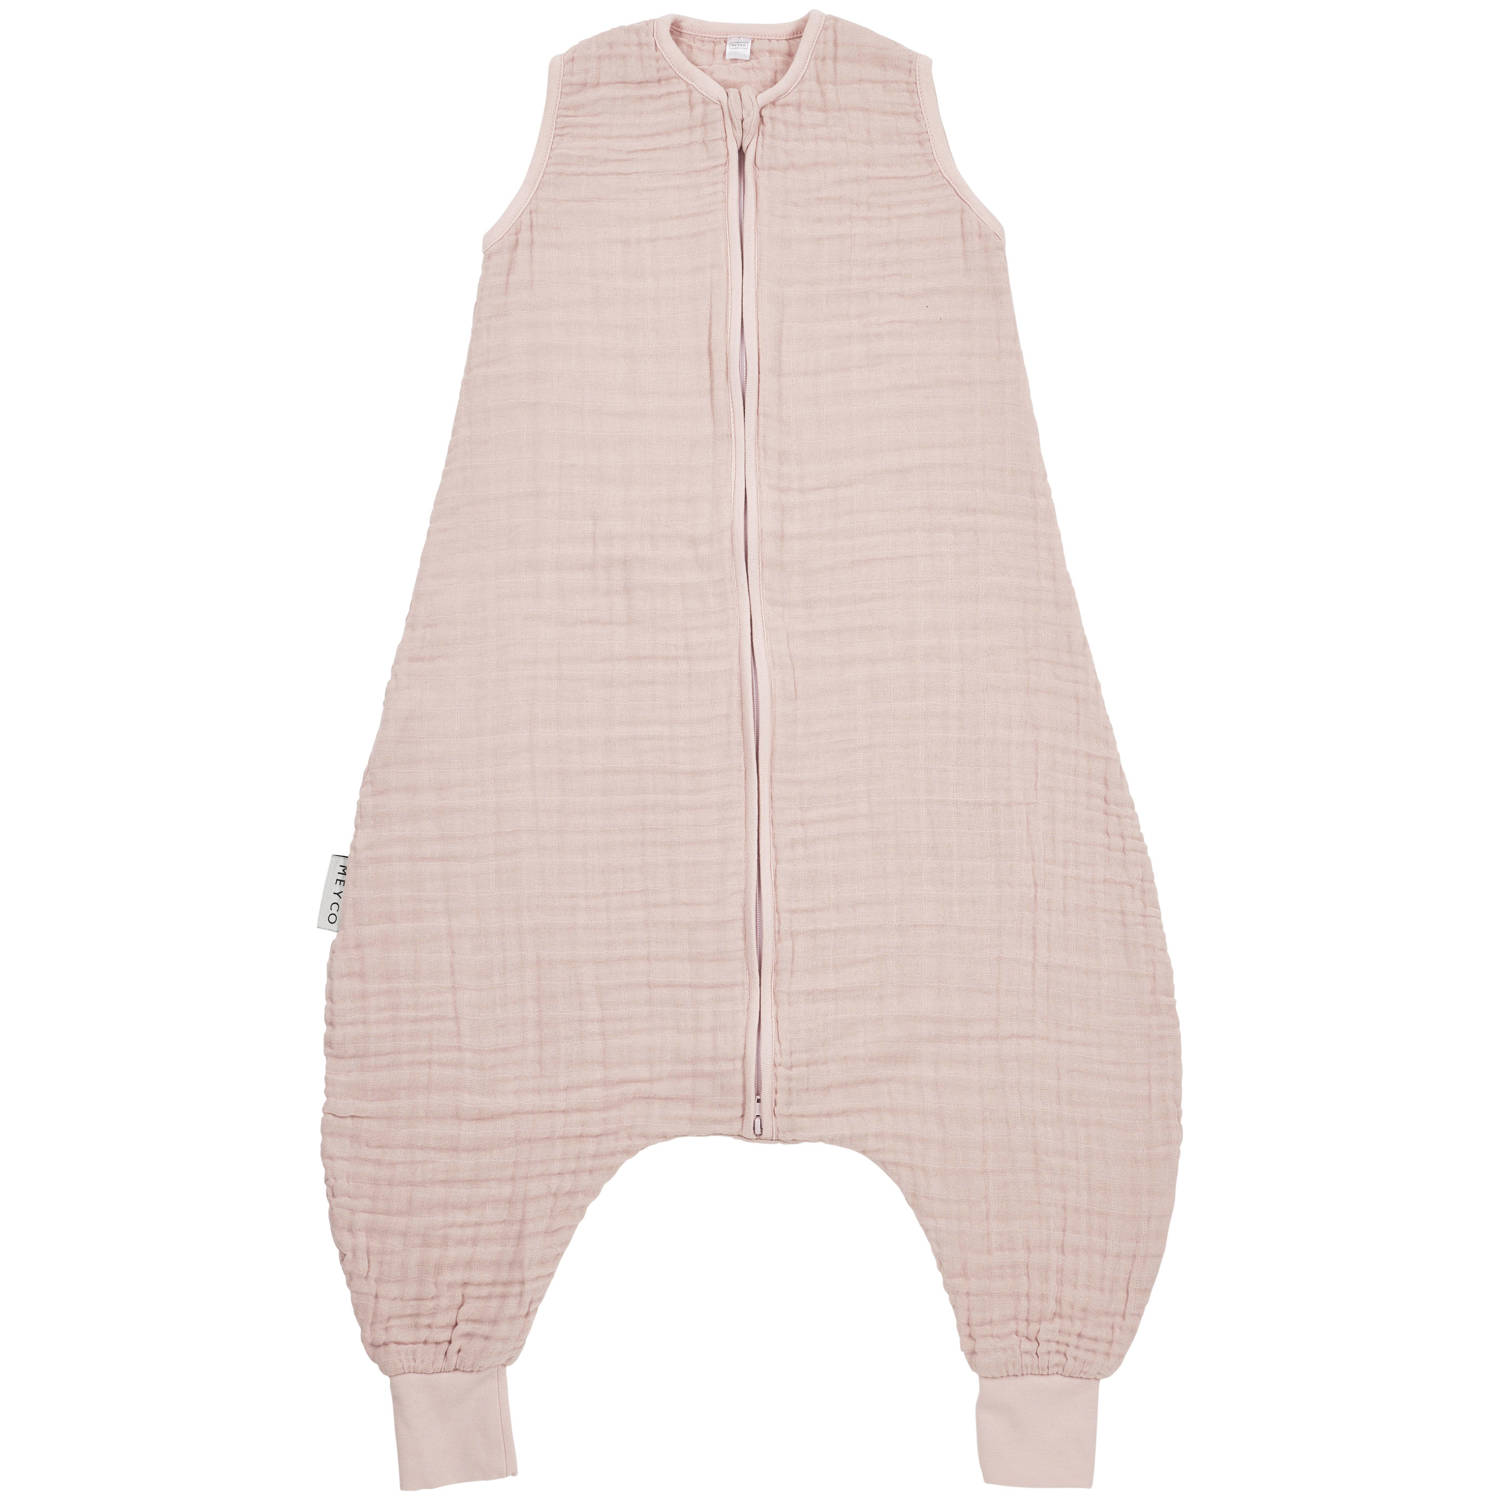 Meyco hydrofiele baby zomer slaapoverall jumper soft pink